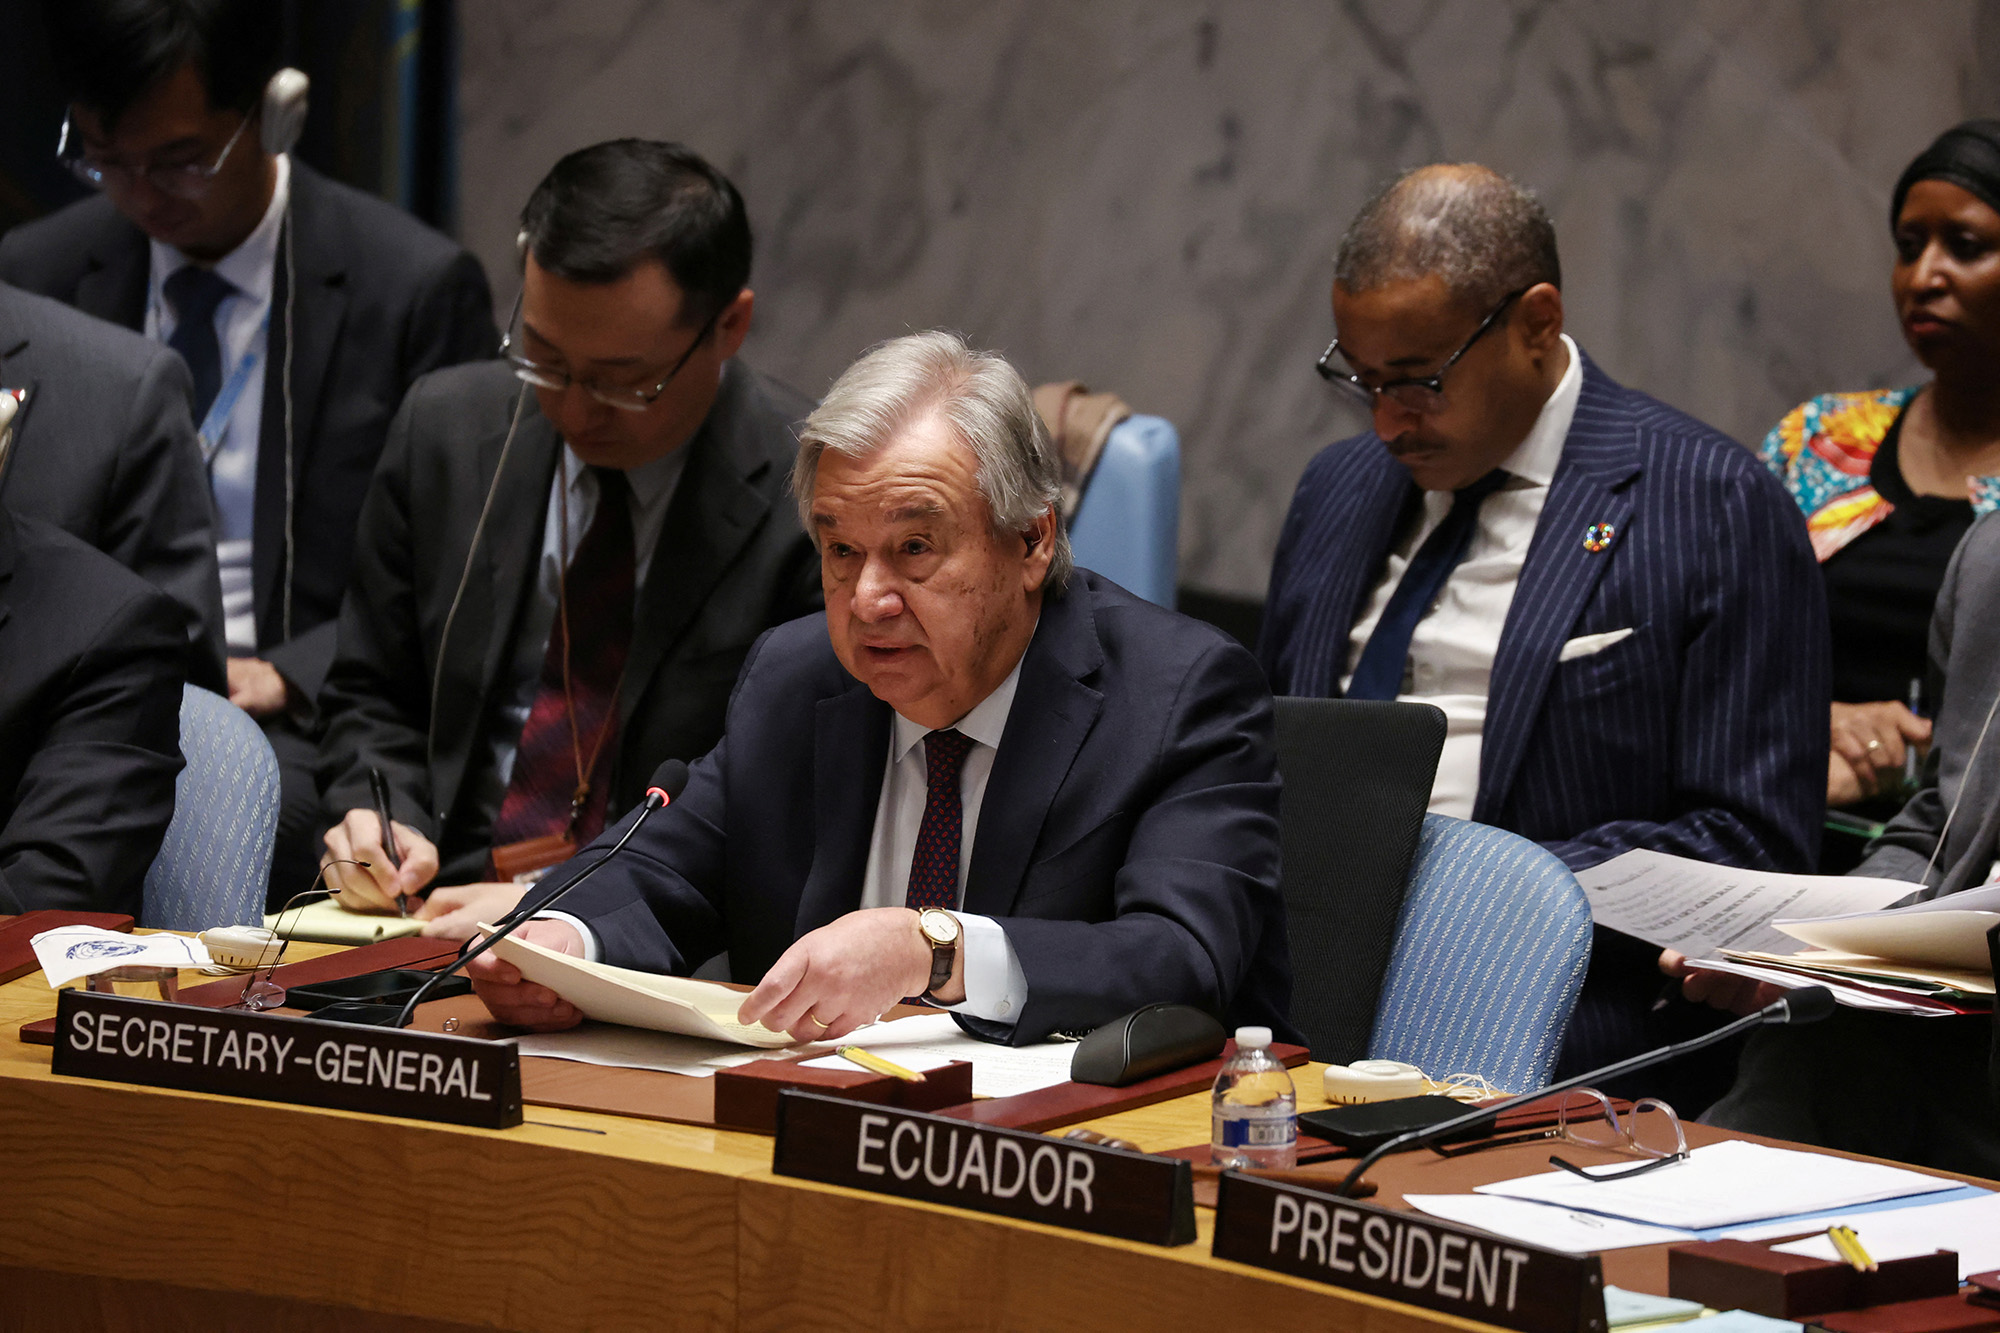 United Nations Secretary-General Antonio Guterres speaks during a United Nations Security Council meeting about his invoking Article 99 of the United Nations charter at the UN headquarters in New York City, on December 8.